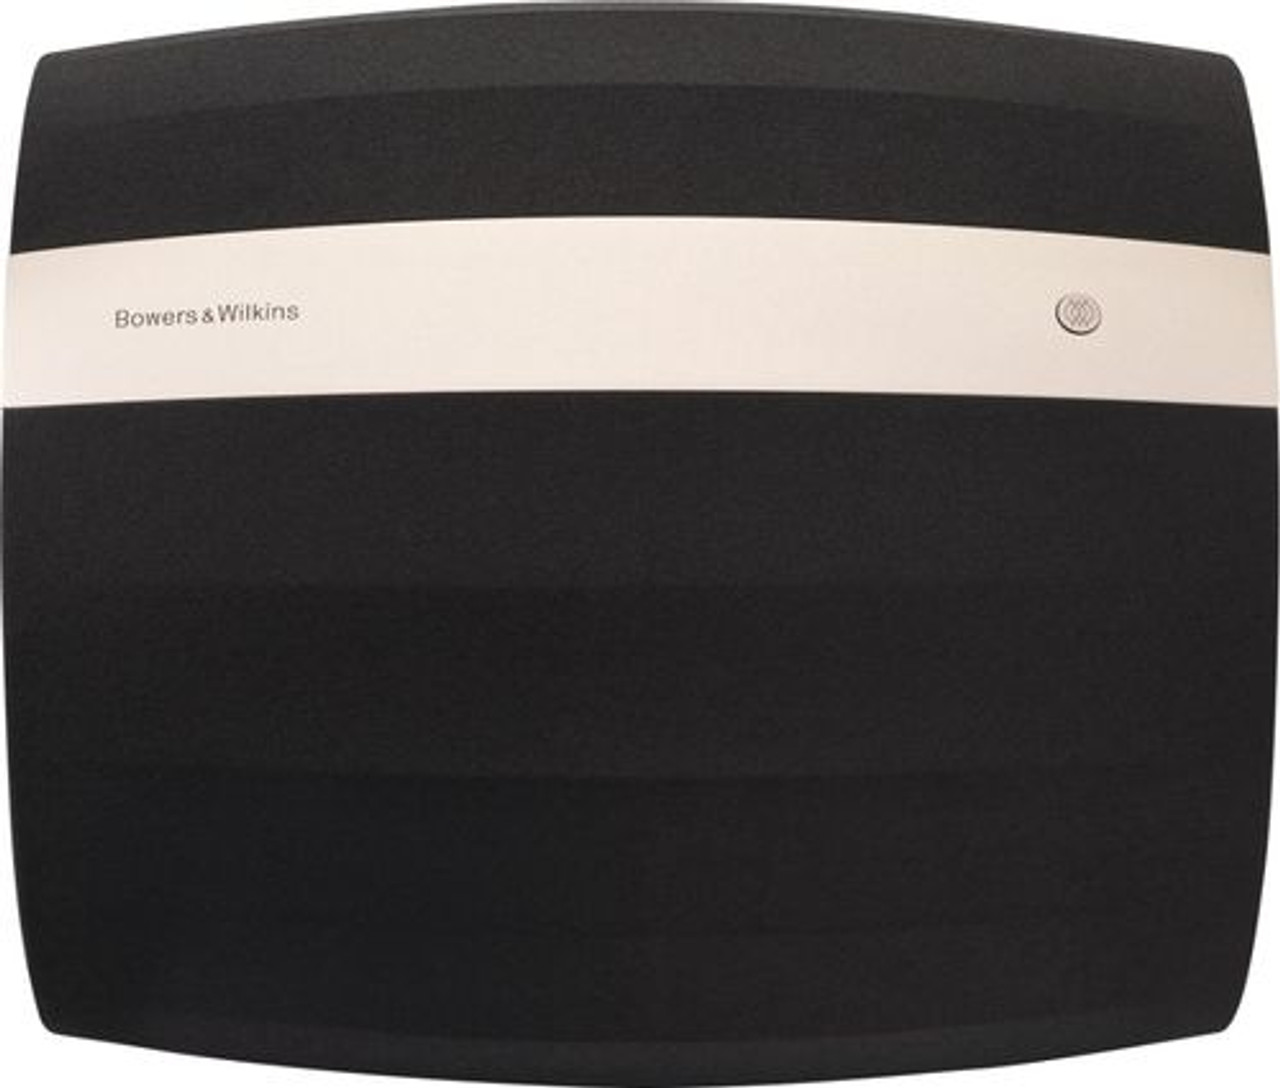 Bowers & Wilkins - Formation Bass Dual 6-1/2" 250W Powered Wireless Subwoofer - Black